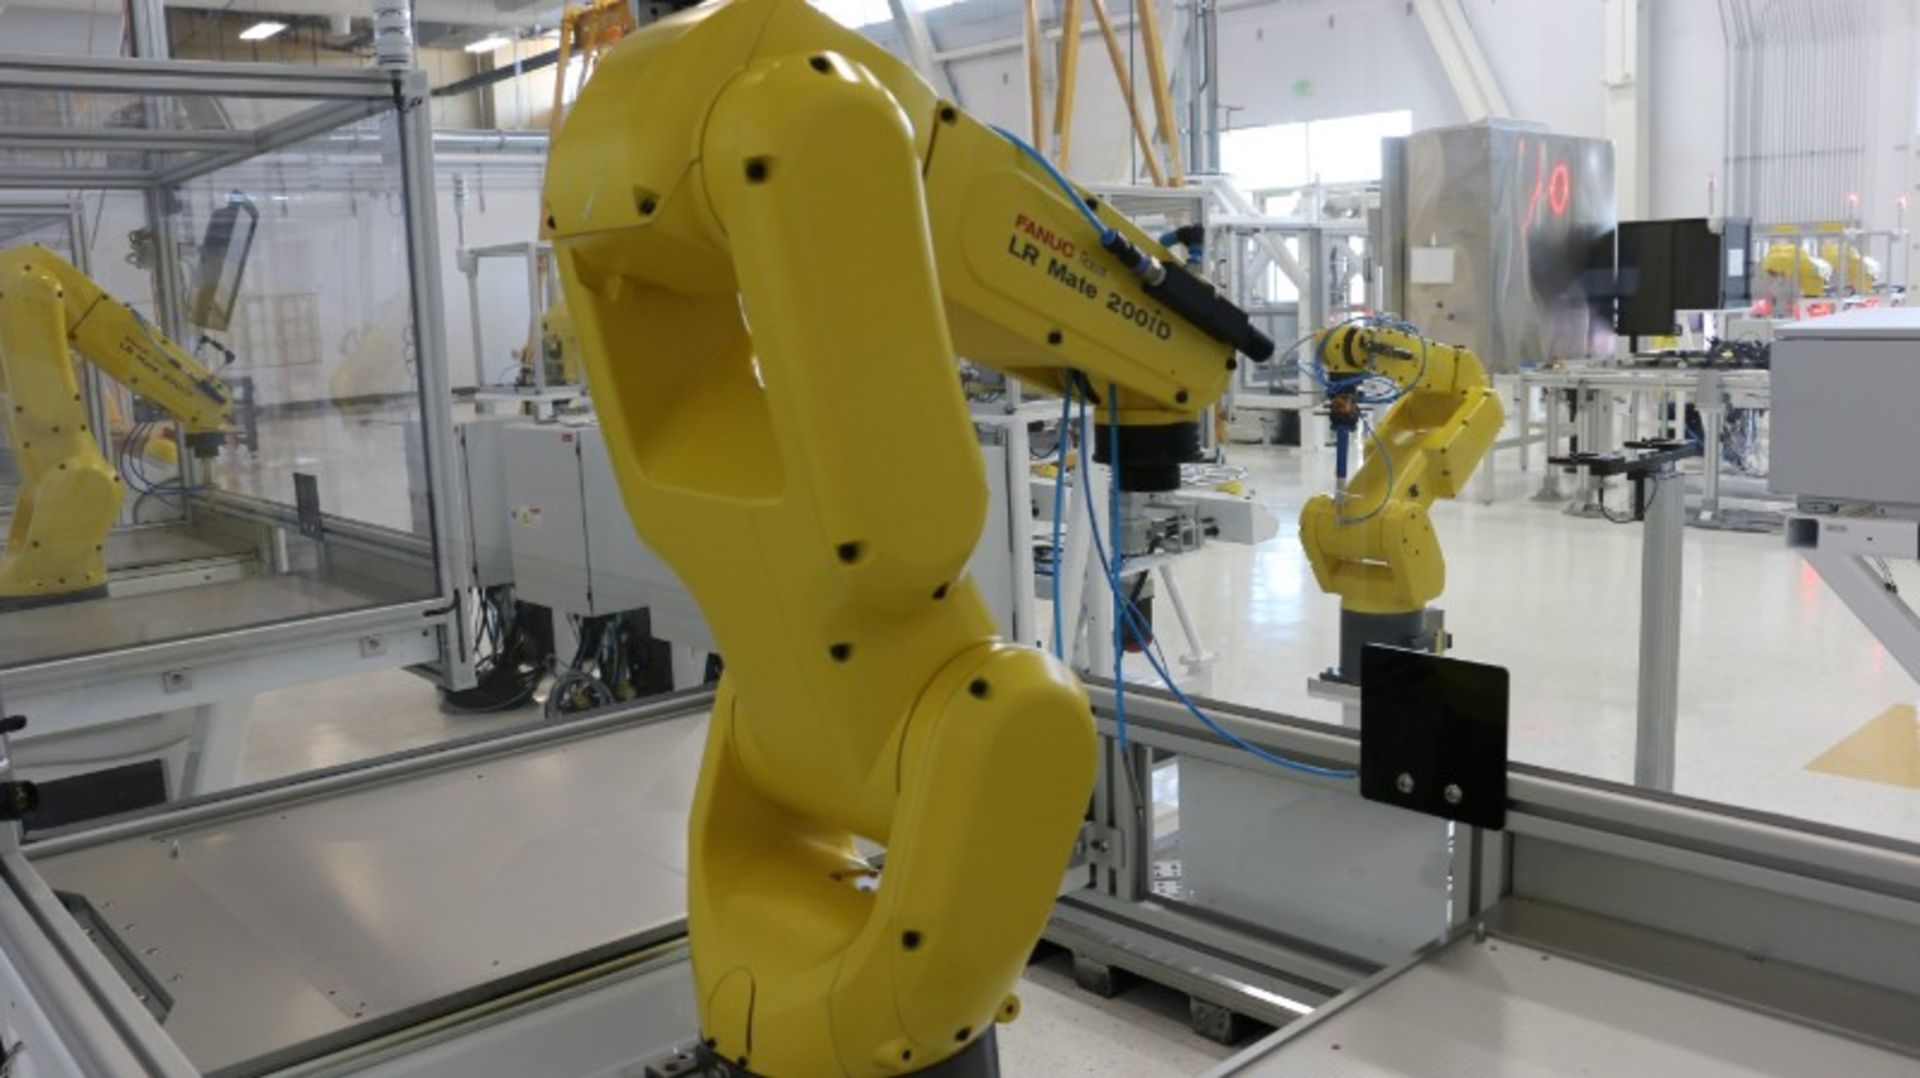 Fanuc Model LR Mate 200iD 6 Axis Robot - Image 7 of 10